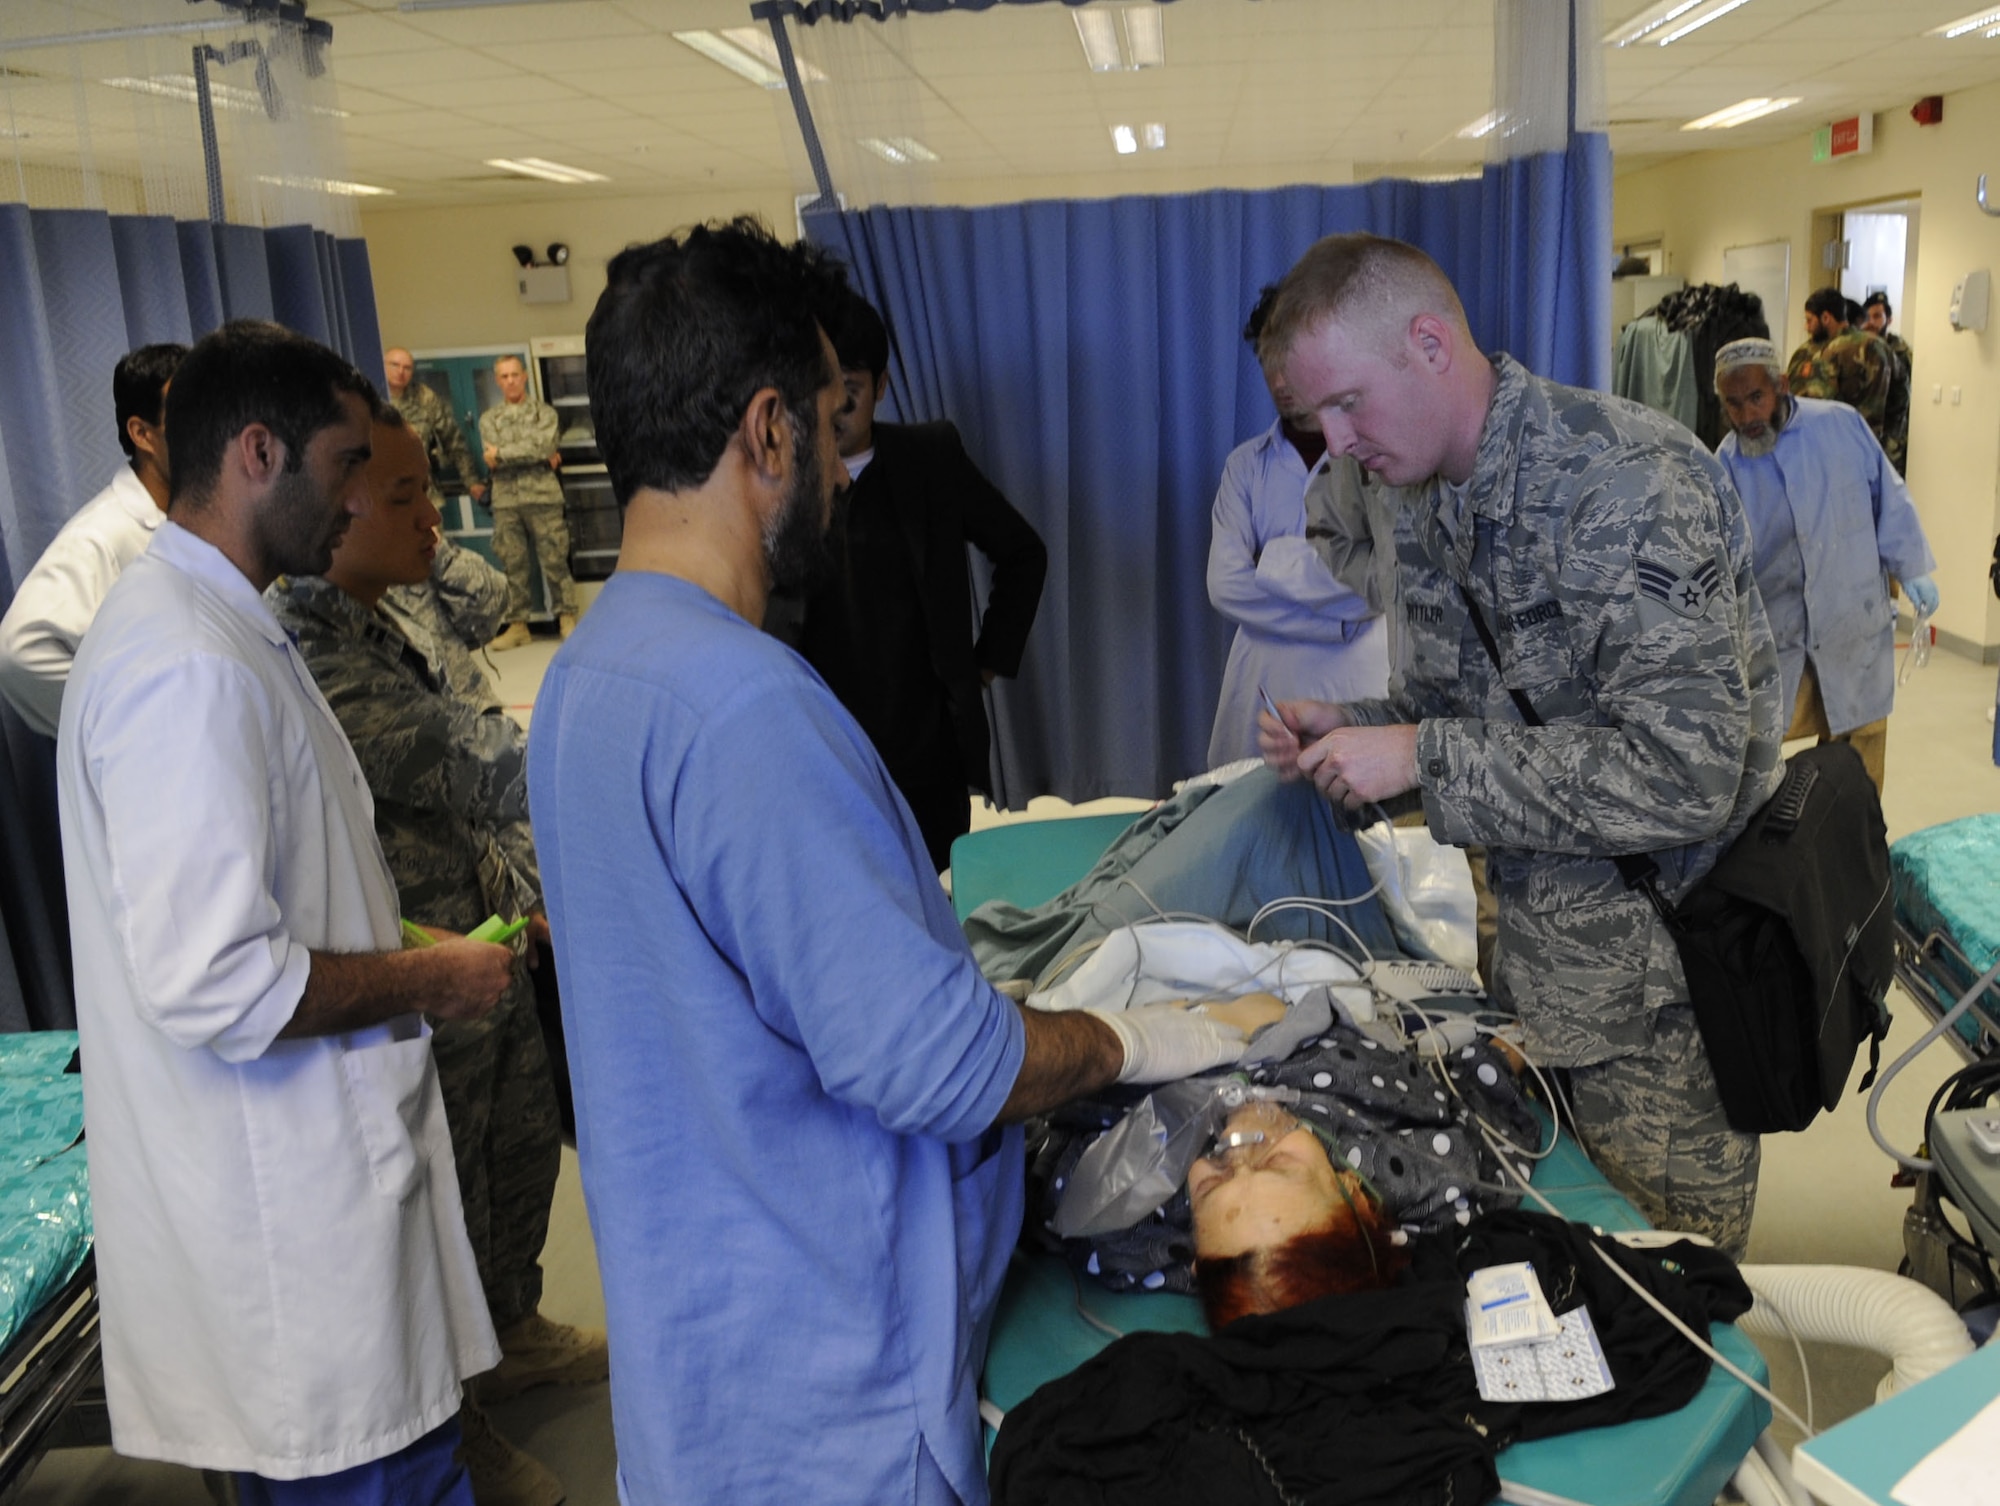 Senior Airman Benjamin Spittler, a mentor for emergency room procedures, advises Afghan medical professionals how on to place EKG, or electrocardiogram, leads on a very lean elderly woman who’d been admitted to the emergency room of the Kandahar Regional Medical Hospital after having a stroke and becoming unconscious after falling Jan. 30, 2010. Airman Spittler is a mentor with the Medical Embedded Training Team for the Kandahar Regional Military Hospital on Camp Hero, Afghanistan. (U.S. Air Force photo/Senior Airman Nancy Hooks/Released)